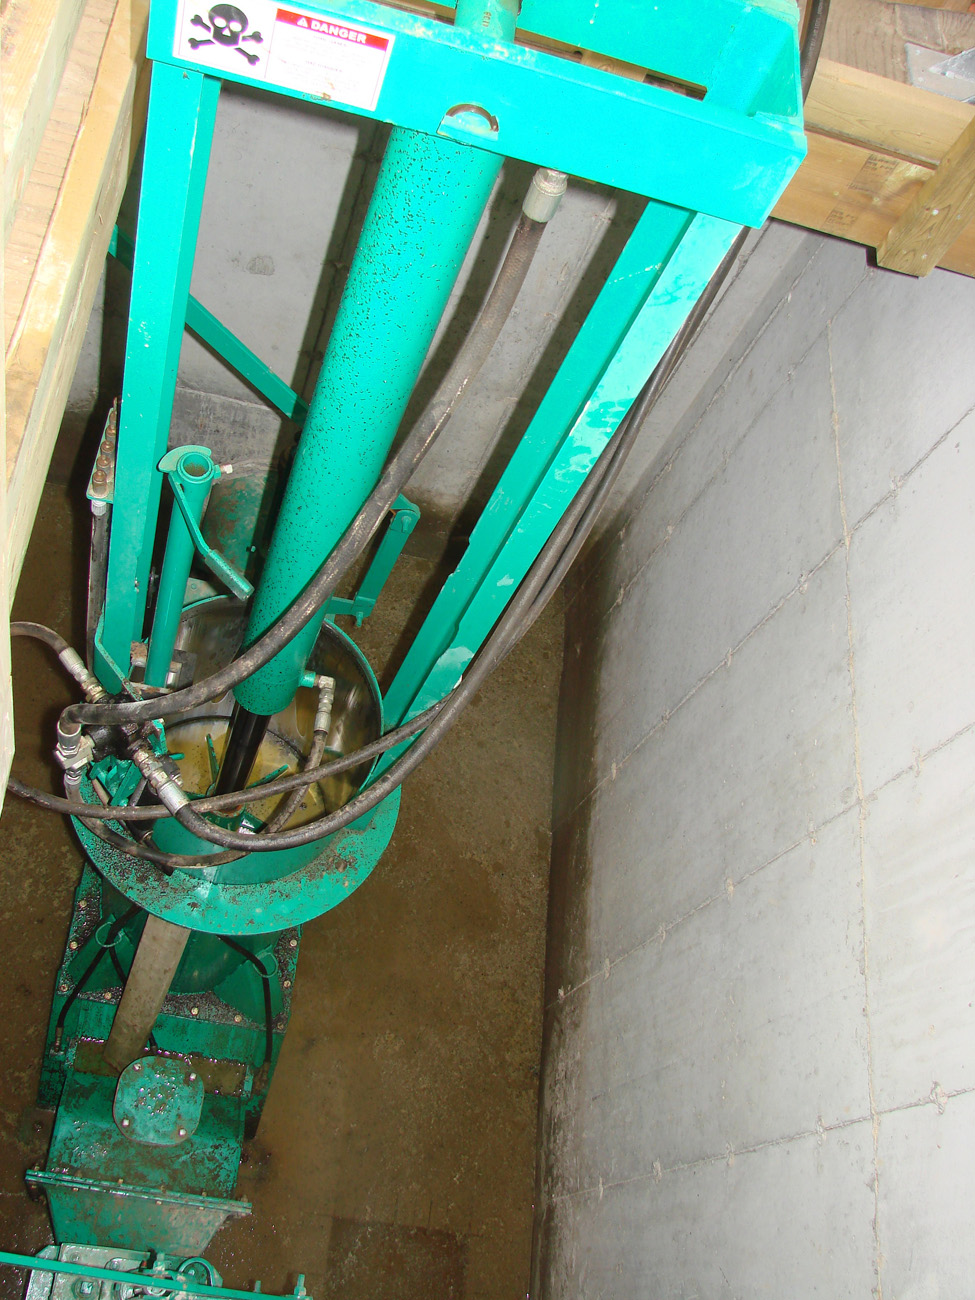 Hydraulic pump used to transfer sand-laden manure to storage